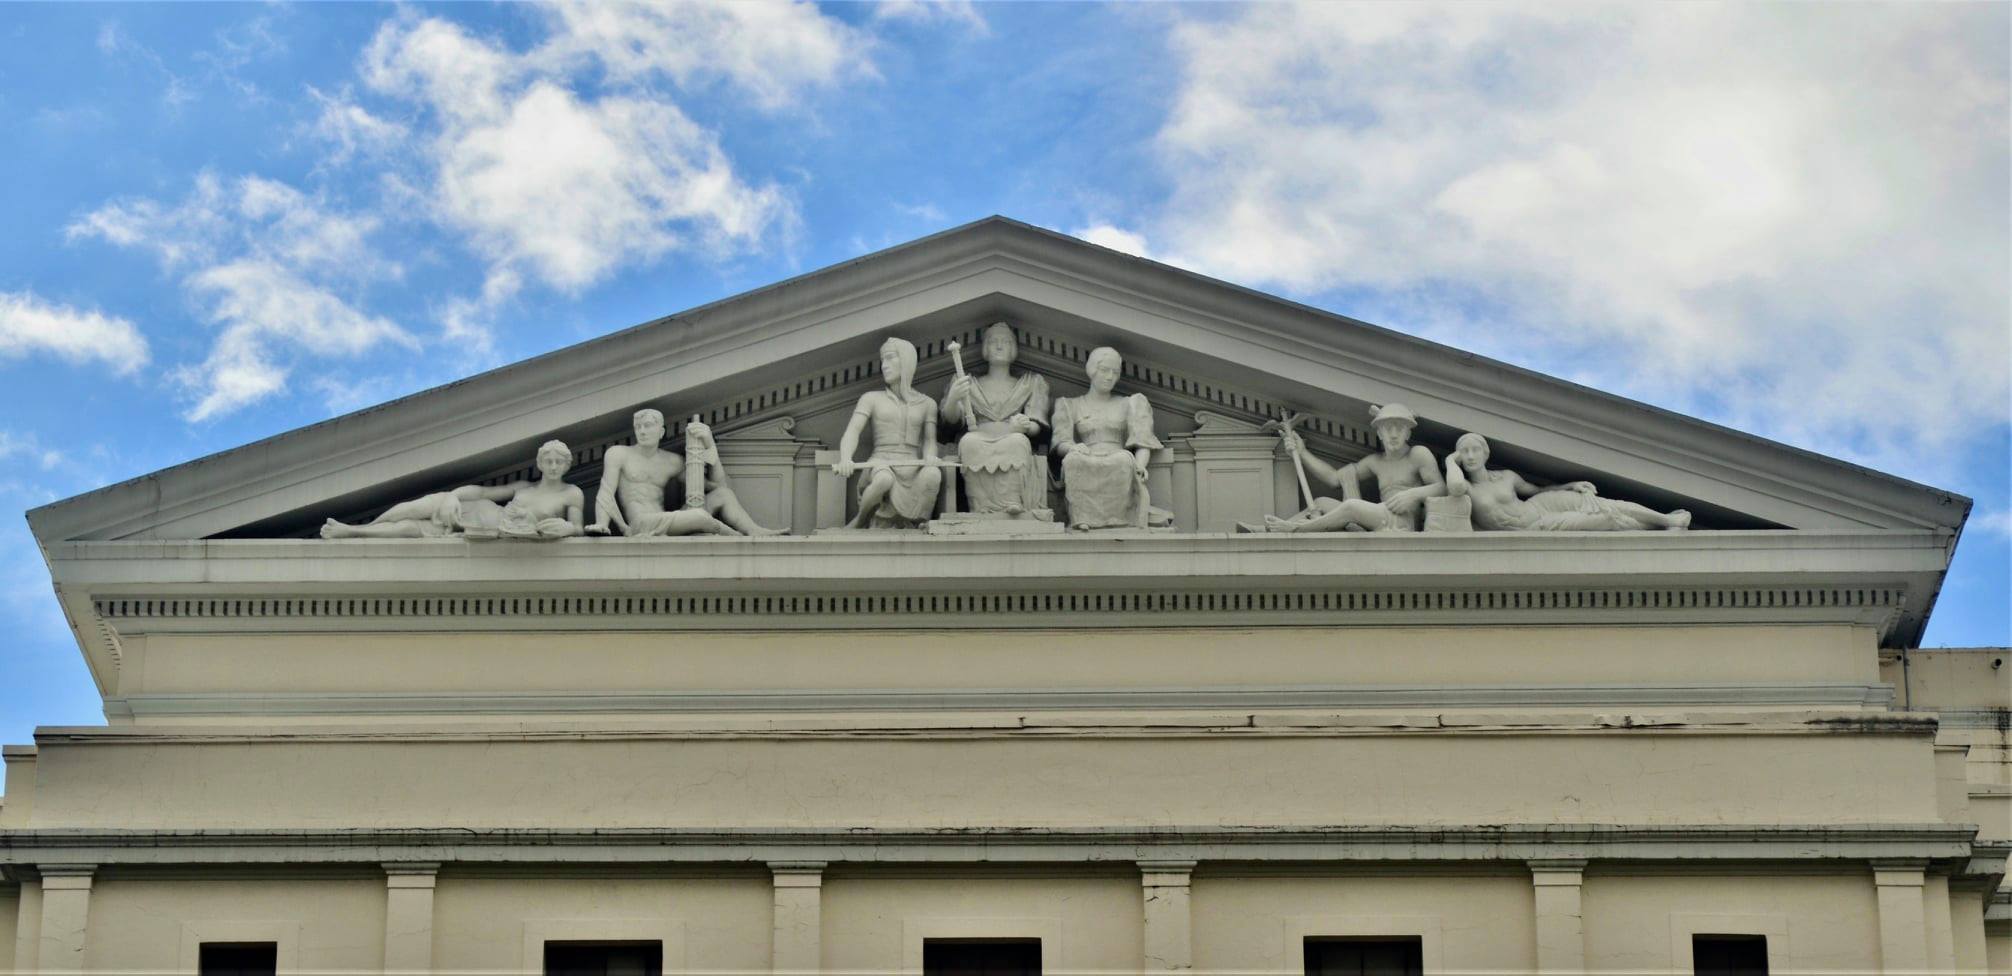 ornamentation and sculptural group of work at the top of the building were attributed to Otto Fischer-Credo, Walter Strauss, Vidal Tampinco and Ramon Martinez.